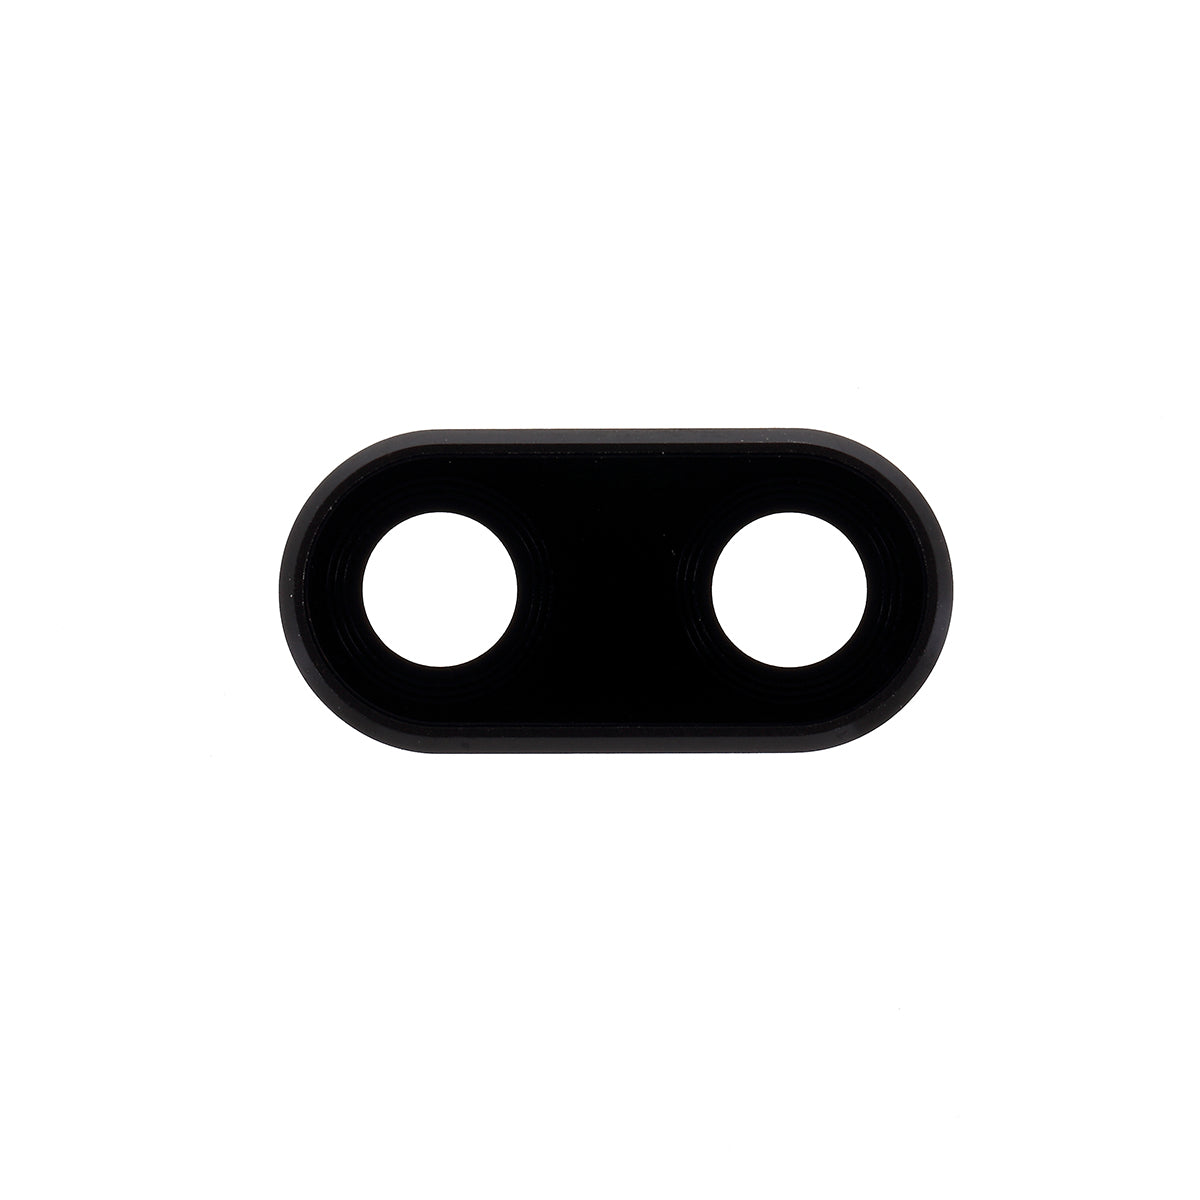 For Huawei Honor 10 OEM Rear Camera Lens Ring Cover Replacement Part - Black